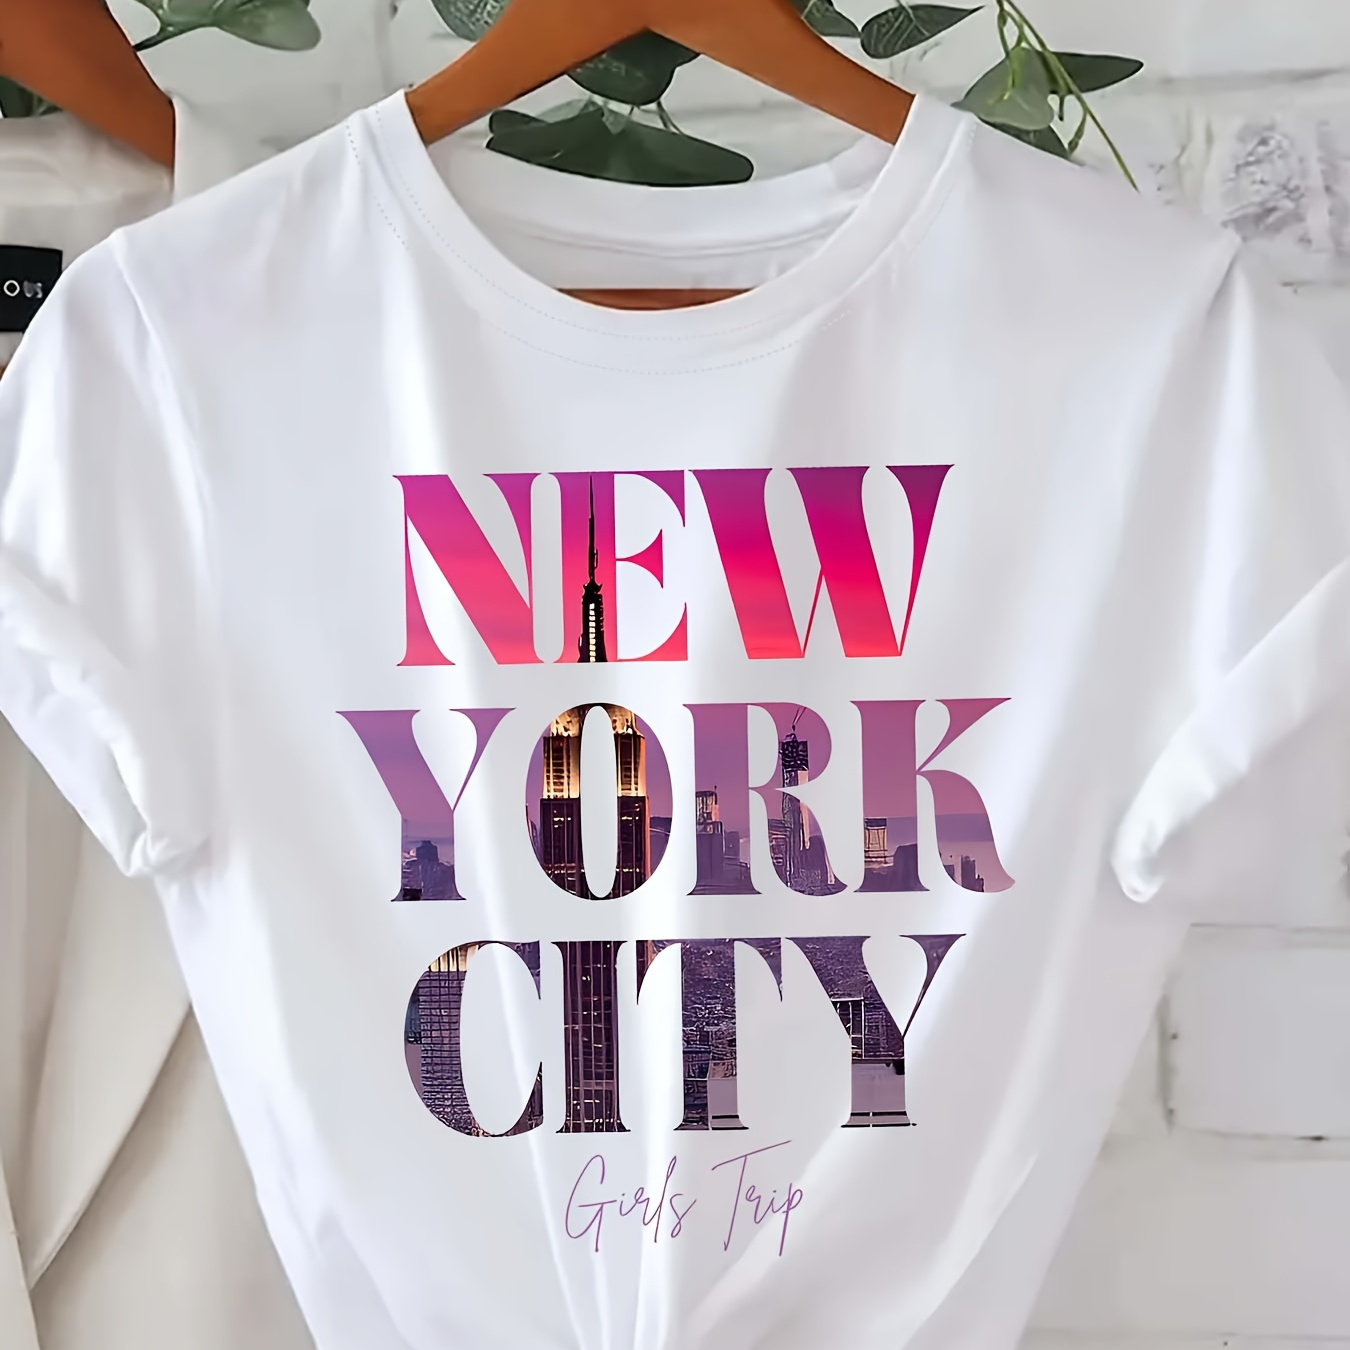 

New York City Letter Print Crew Neck T-shirt, Casual Short Sleeve Top For Spring & Summer, Women's Clothing